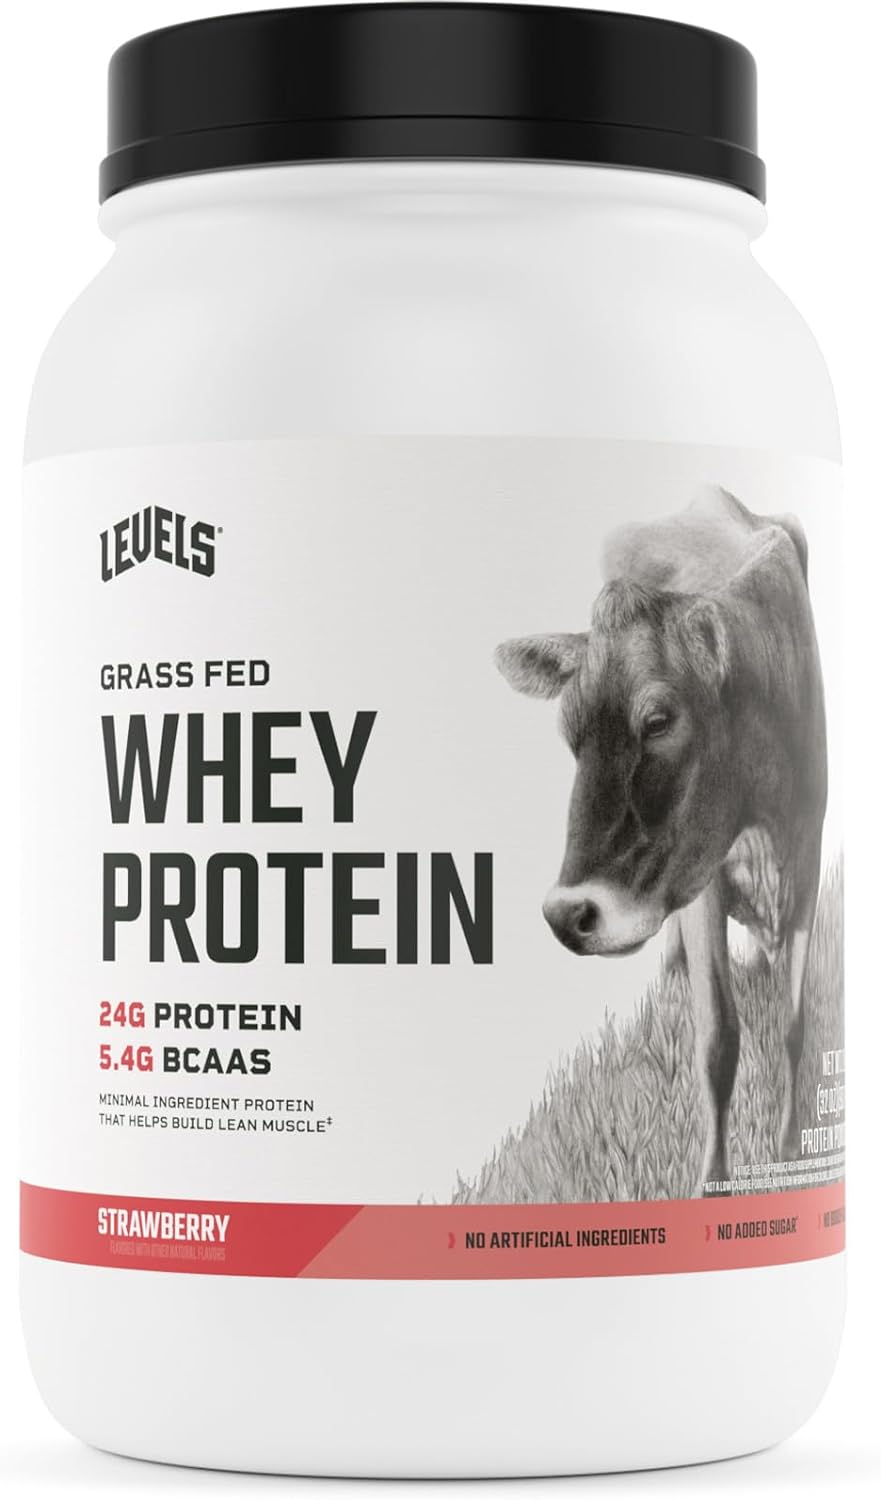 Levels Grass Fed 100% Whey Protein, No Hormones, Strawberry, 2LB